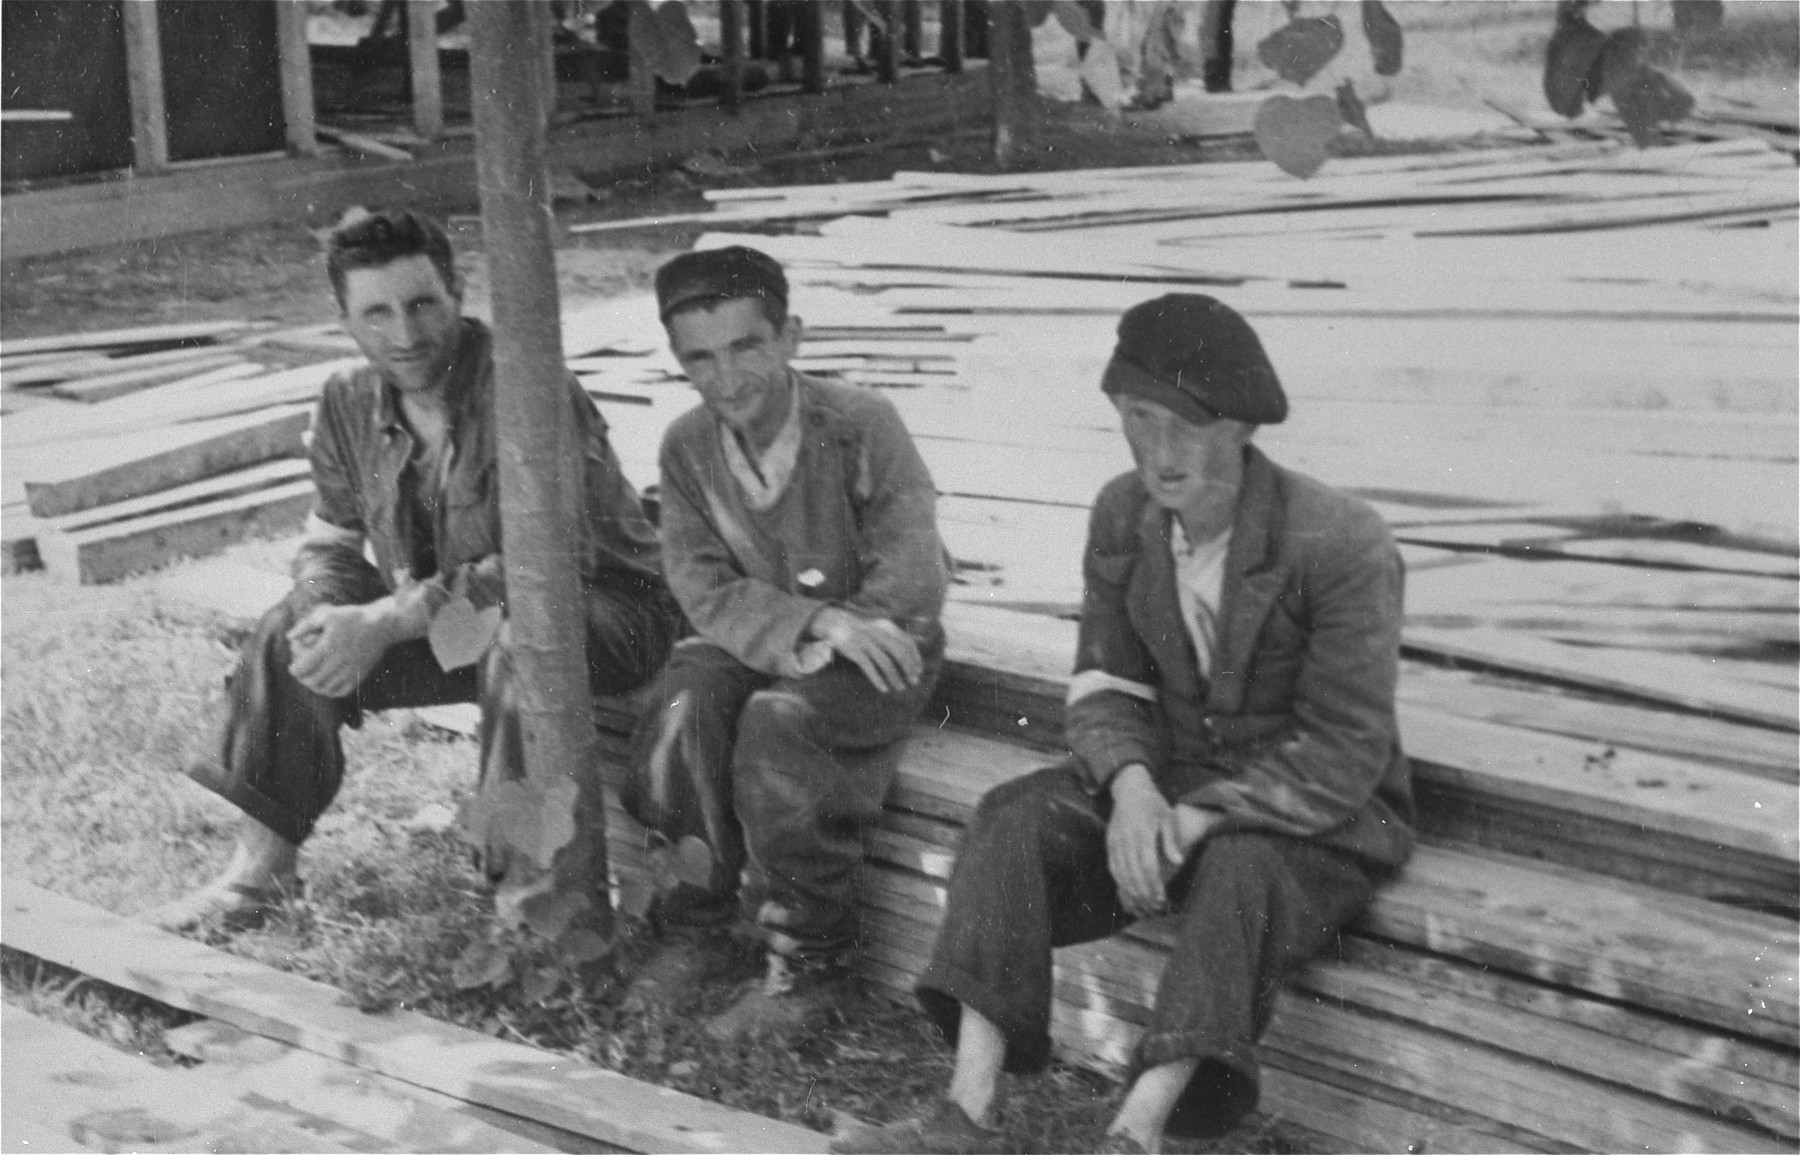 Three Jewish men who have been conscripted for forced labor, sit on a pile of lumber in Konskowola.